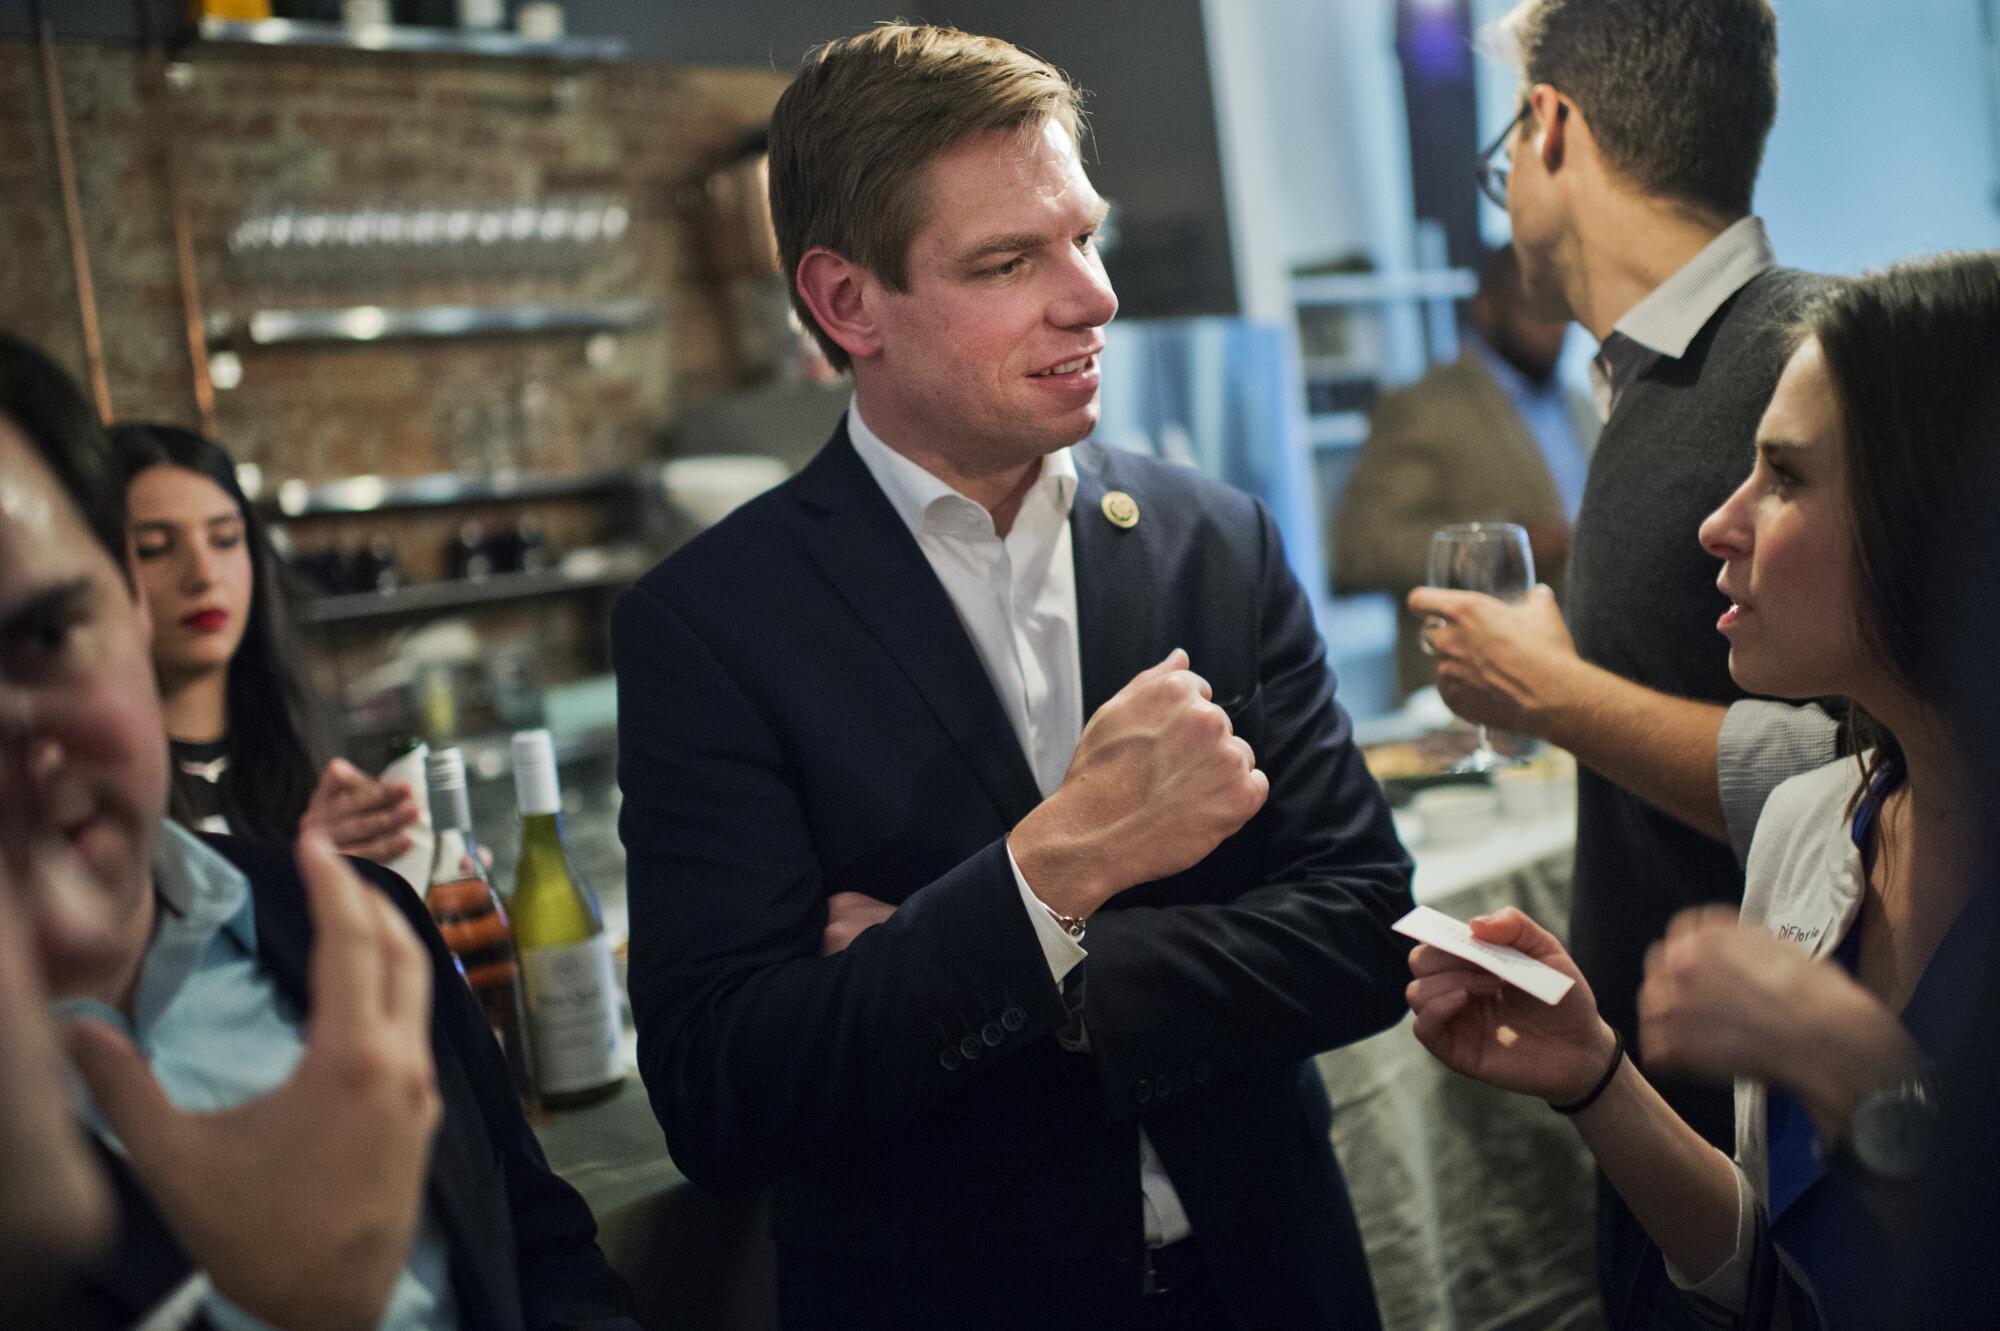 Eric Swalwell mingles at an event.